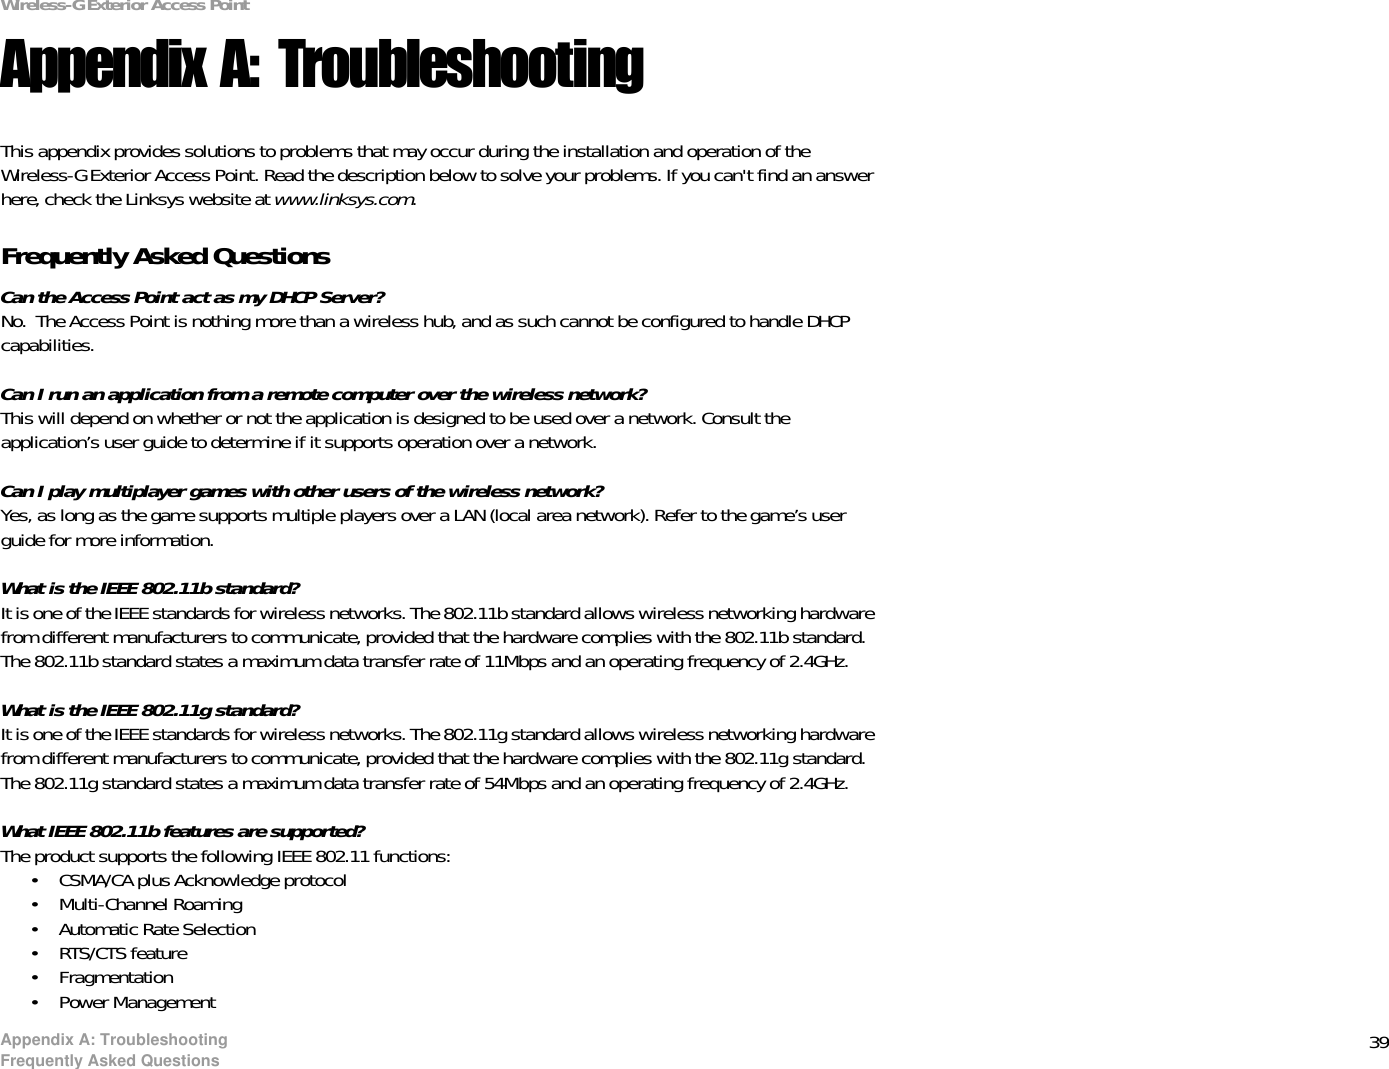 39Appendix A: TroubleshootingFrequently Asked QuestionsWireless-G Exterior Access PointAppendix A: TroubleshootingThis appendix provides solutions to problems that may occur during the installation and operation of the Wireless-G Exterior Access Point. Read the description below to solve your problems. If you can&apos;t find an answer here, check the Linksys website at www.linksys.com.Frequently Asked QuestionsCan the Access Point act as my DHCP Server?No.  The Access Point is nothing more than a wireless hub, and as such cannot be configured to handle DHCP capabilities.Can I run an application from a remote computer over the wireless network?This will depend on whether or not the application is designed to be used over a network. Consult the application’s user guide to determine if it supports operation over a network.Can I play multiplayer games with other users of the wireless network?Yes, as long as the game supports multiple players over a LAN (local area network). Refer to the game’s user guide for more information.What is the IEEE 802.11b standard?It is one of the IEEE standards for wireless networks. The 802.11b standard allows wireless networking hardware from different manufacturers to communicate, provided that the hardware complies with the 802.11b standard. The 802.11b standard states a maximum data transfer rate of 11Mbps and an operating frequency of 2.4GHz.What is the IEEE 802.11g standard?It is one of the IEEE standards for wireless networks. The 802.11g standard allows wireless networking hardware from different manufacturers to communicate, provided that the hardware complies with the 802.11g standard. The 802.11g standard states a maximum data transfer rate of 54Mbps and an operating frequency of 2.4GHz.What IEEE 802.11b features are supported?The product supports the following IEEE 802.11 functions: • CSMA/CA plus Acknowledge protocol • Multi-Channel Roaming • Automatic Rate Selection • RTS/CTS feature • Fragmentation • Power Management 